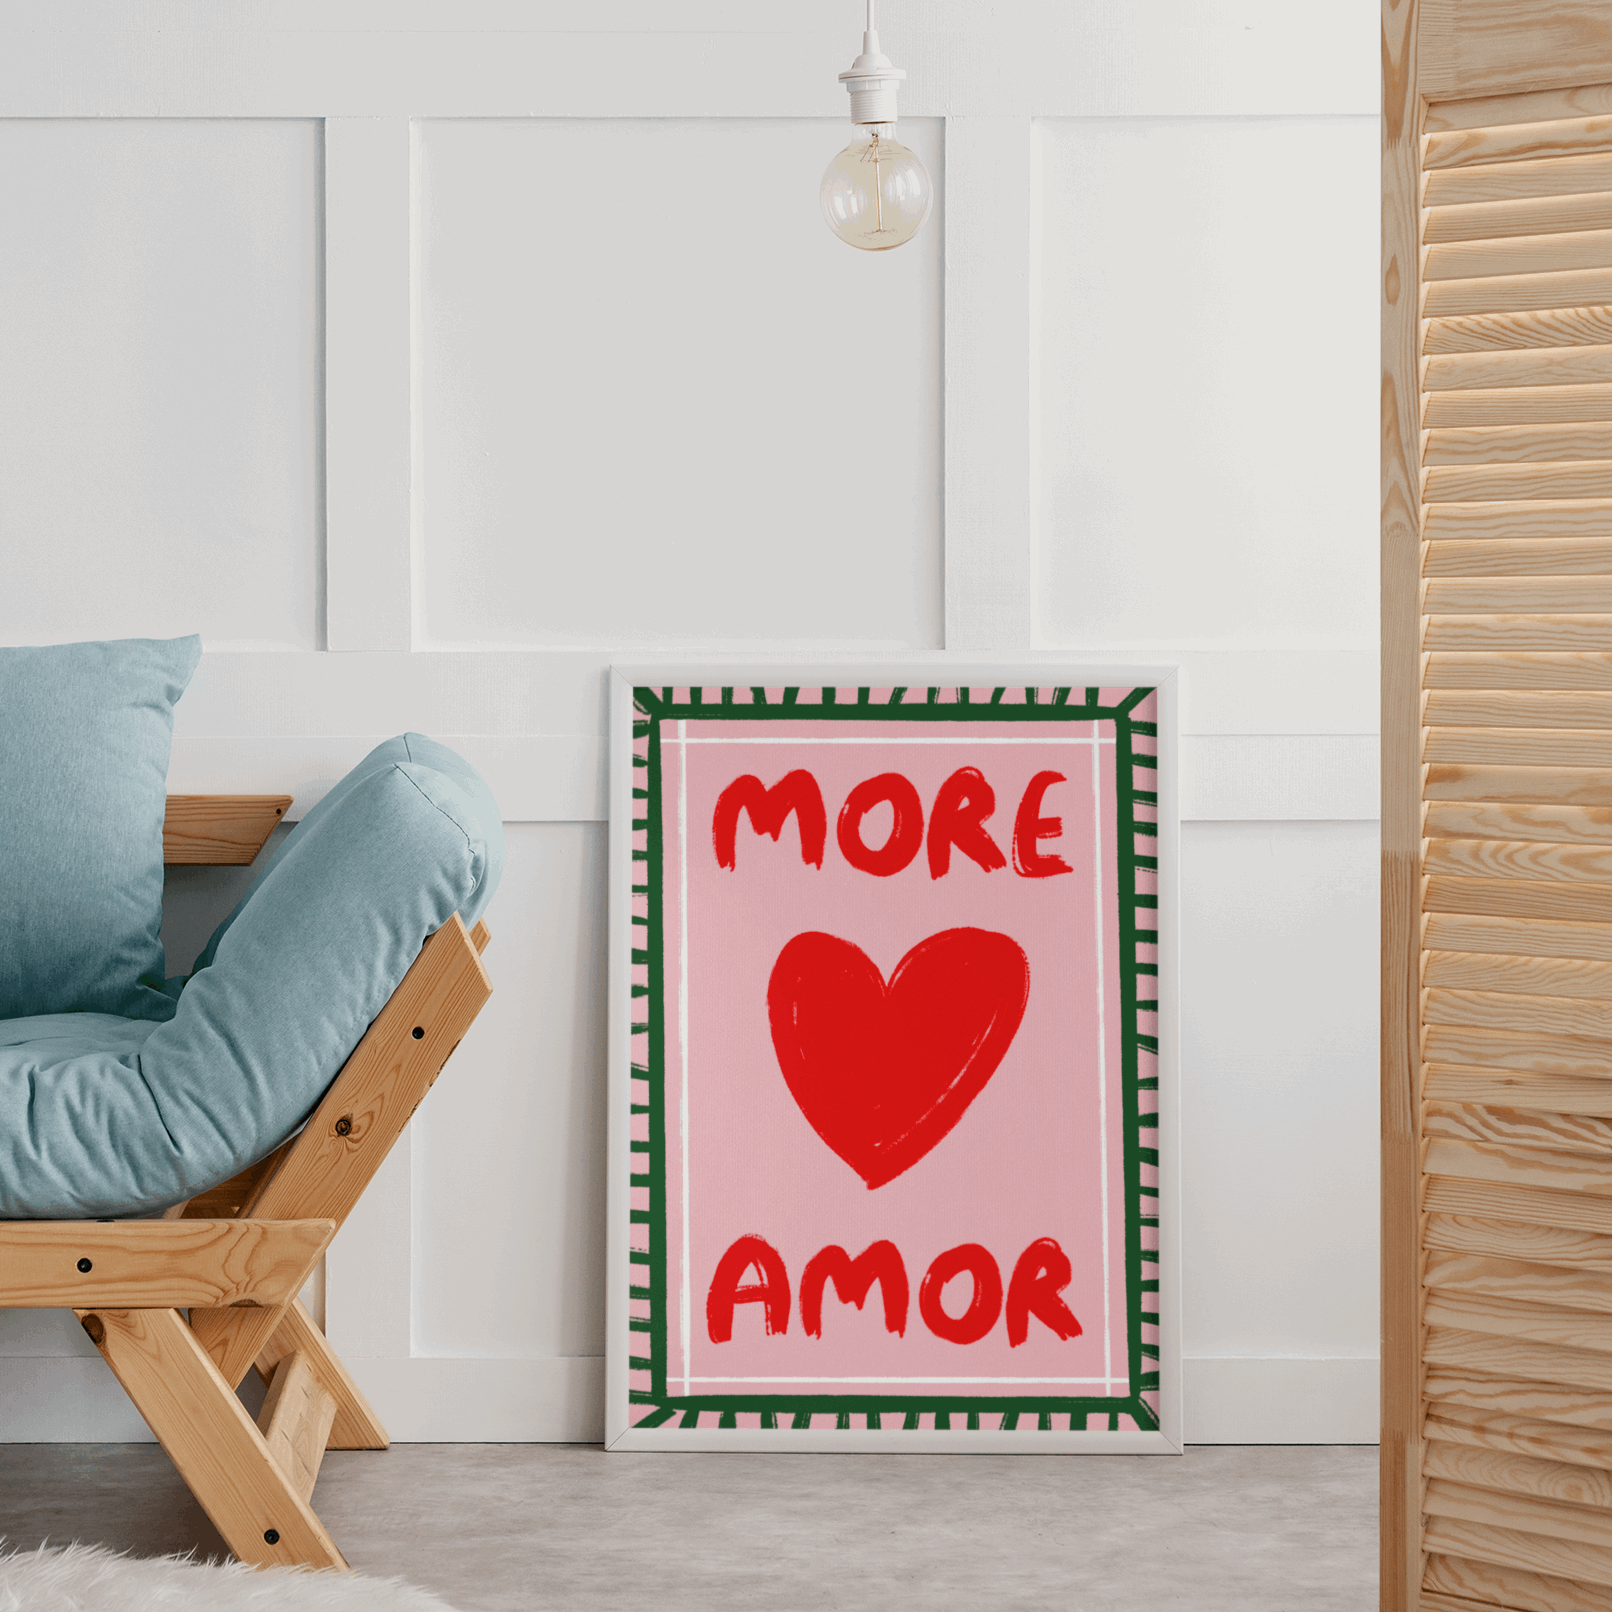 More Amor - Poster